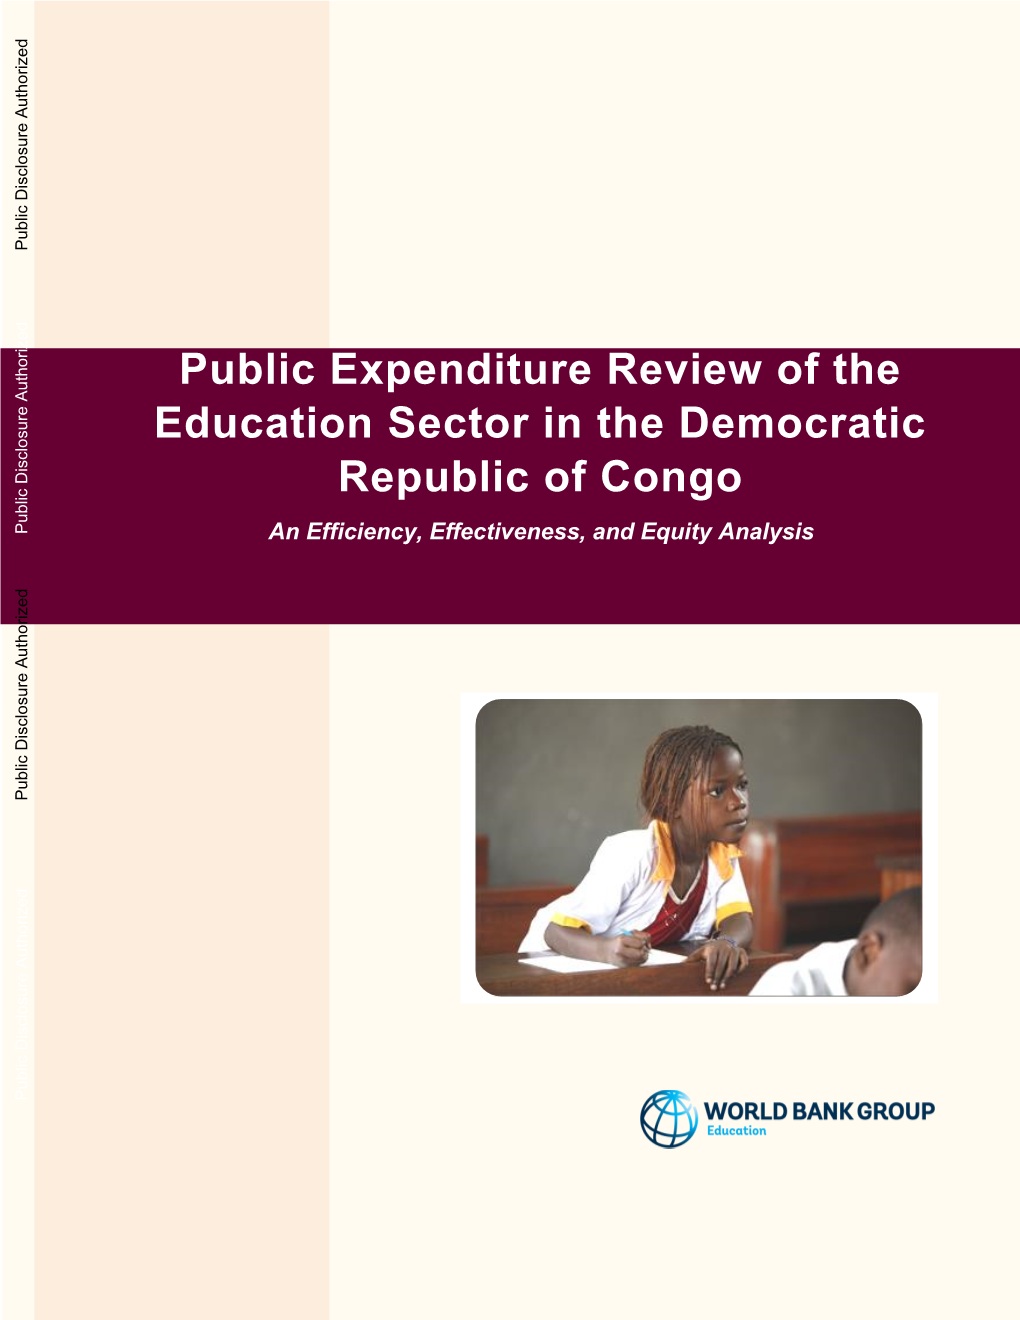 Public Expenditure Review of the Education Sector in the Democratic Republic of Congo